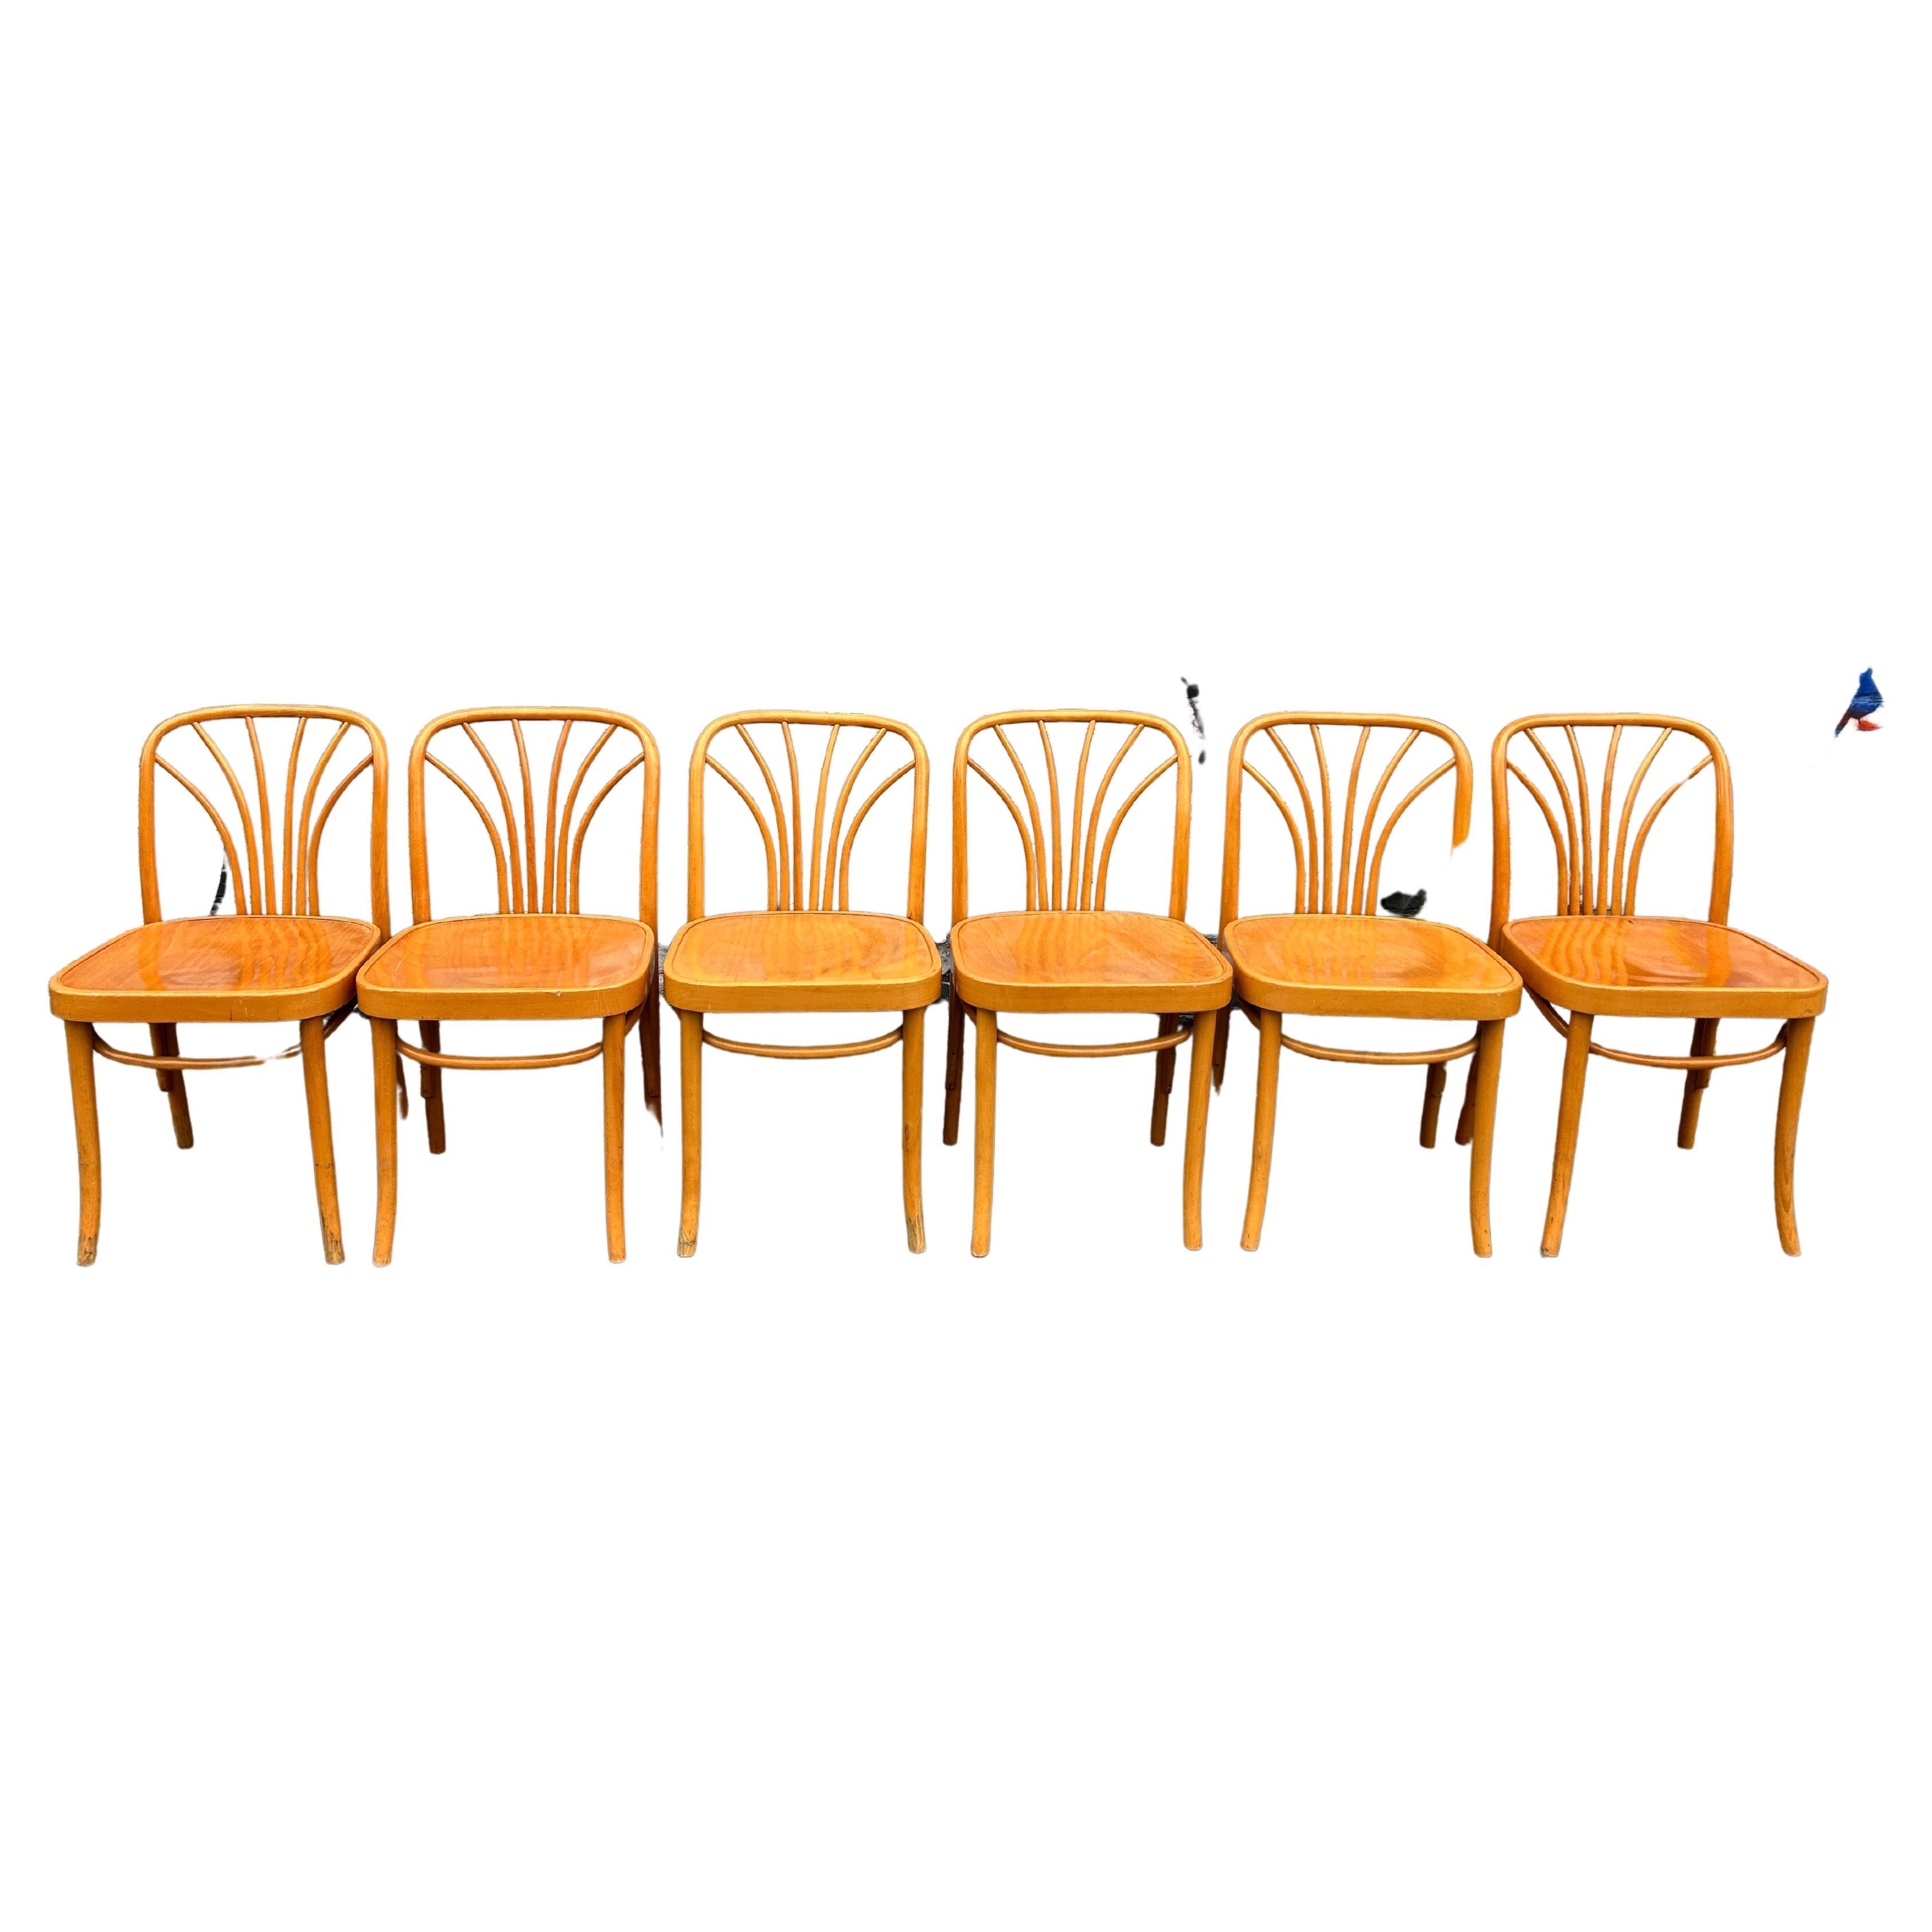 Woodwork Unique Set of 6 Mid-Century Bentwood Dining Chairs Thonet Josef Hoffmann For Sale